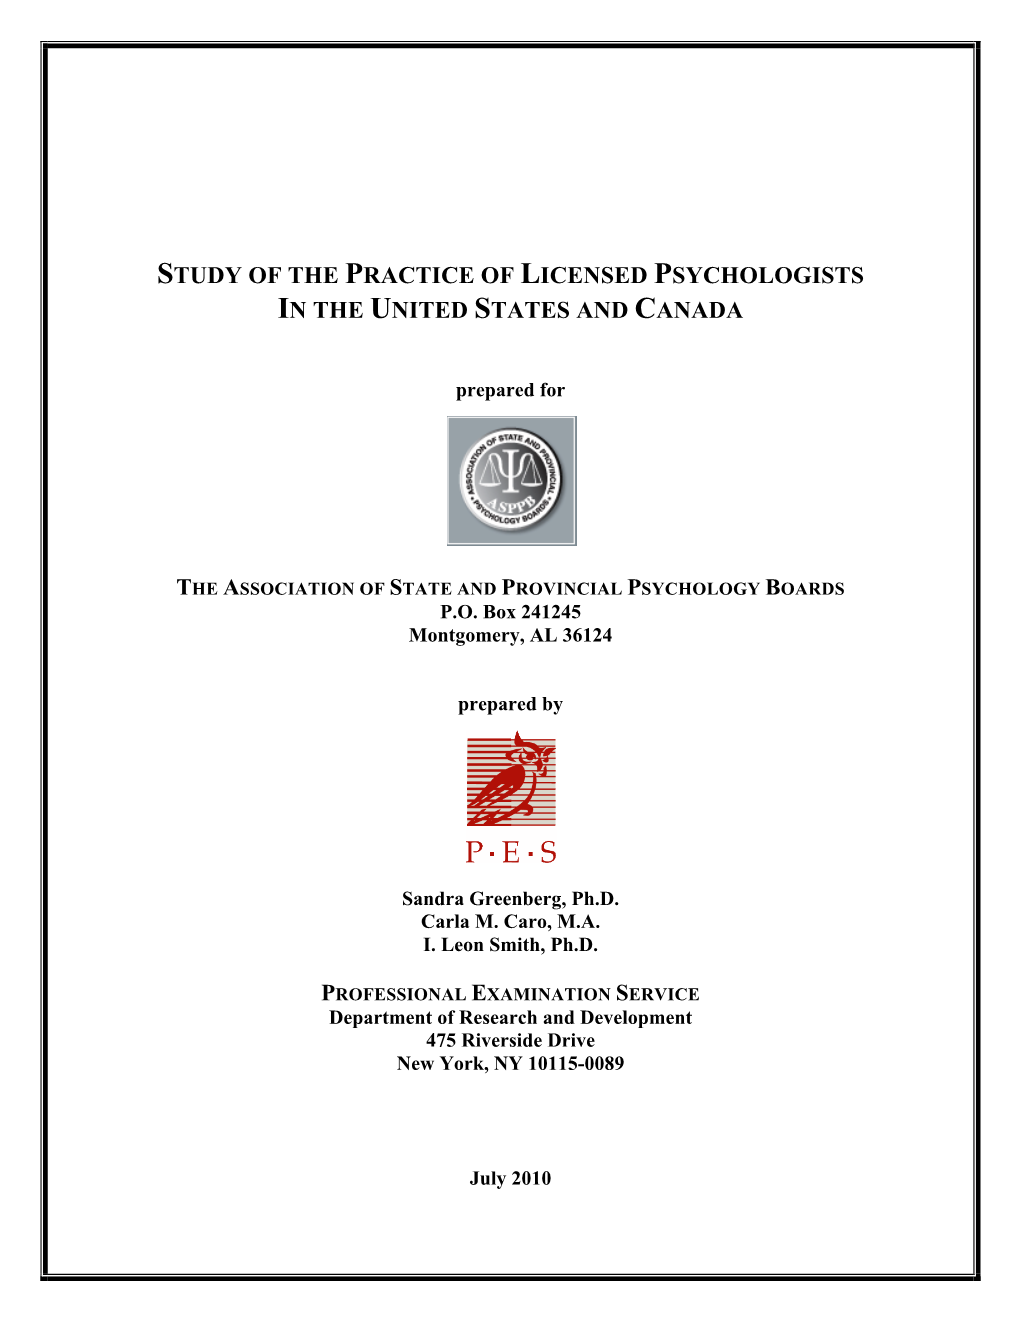 Study of the Practice of Licensed Psychologists in the United States and Canada